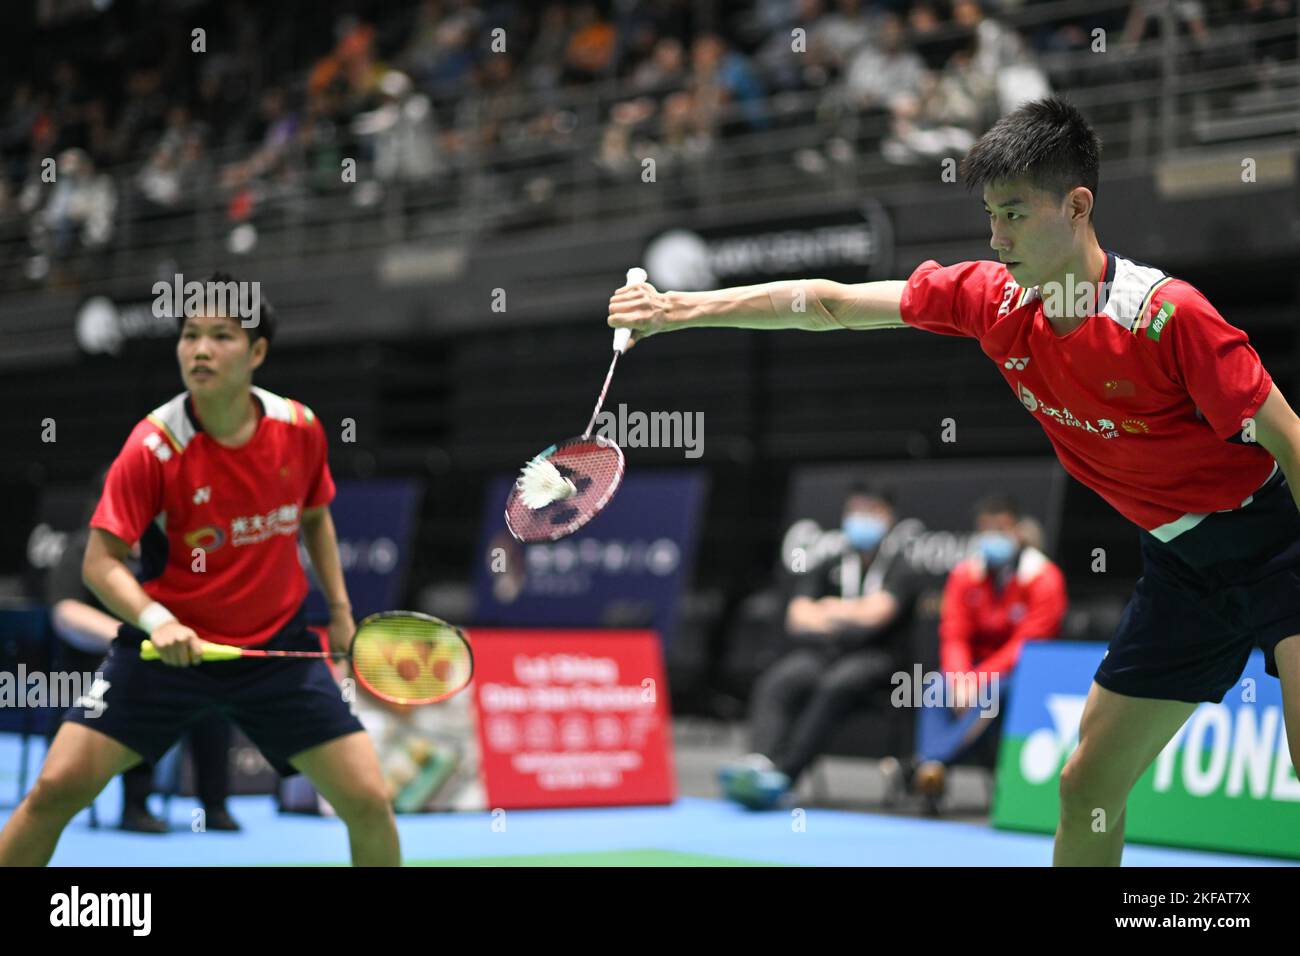 Sydney, Australia. 17th Nov, 2022. Huang Dong Ping (L) and Feng Yan Zhe (R) of China seen during the 2022 SATHIO GROUP Australian Badminton Open mixed double round of 16 match against Young Hyuk Kim and Lee Yu Lim of Korea. Feng and Huang won the match 12-21, 21-14, 21-15. Credit: SOPA Images Limited/Alamy Live News Stock Photo